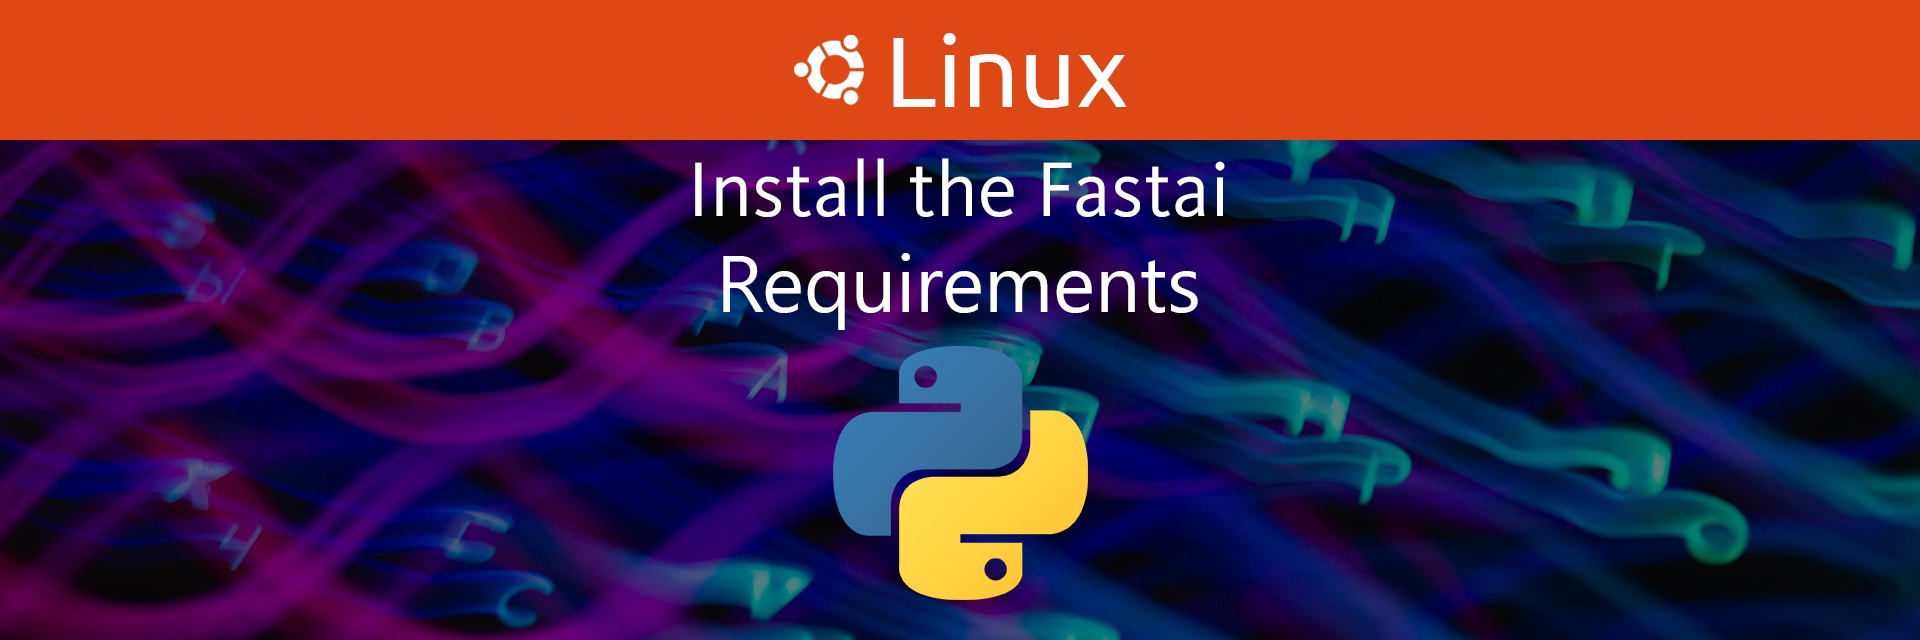 Install the Fastai Course Requirements on Linux